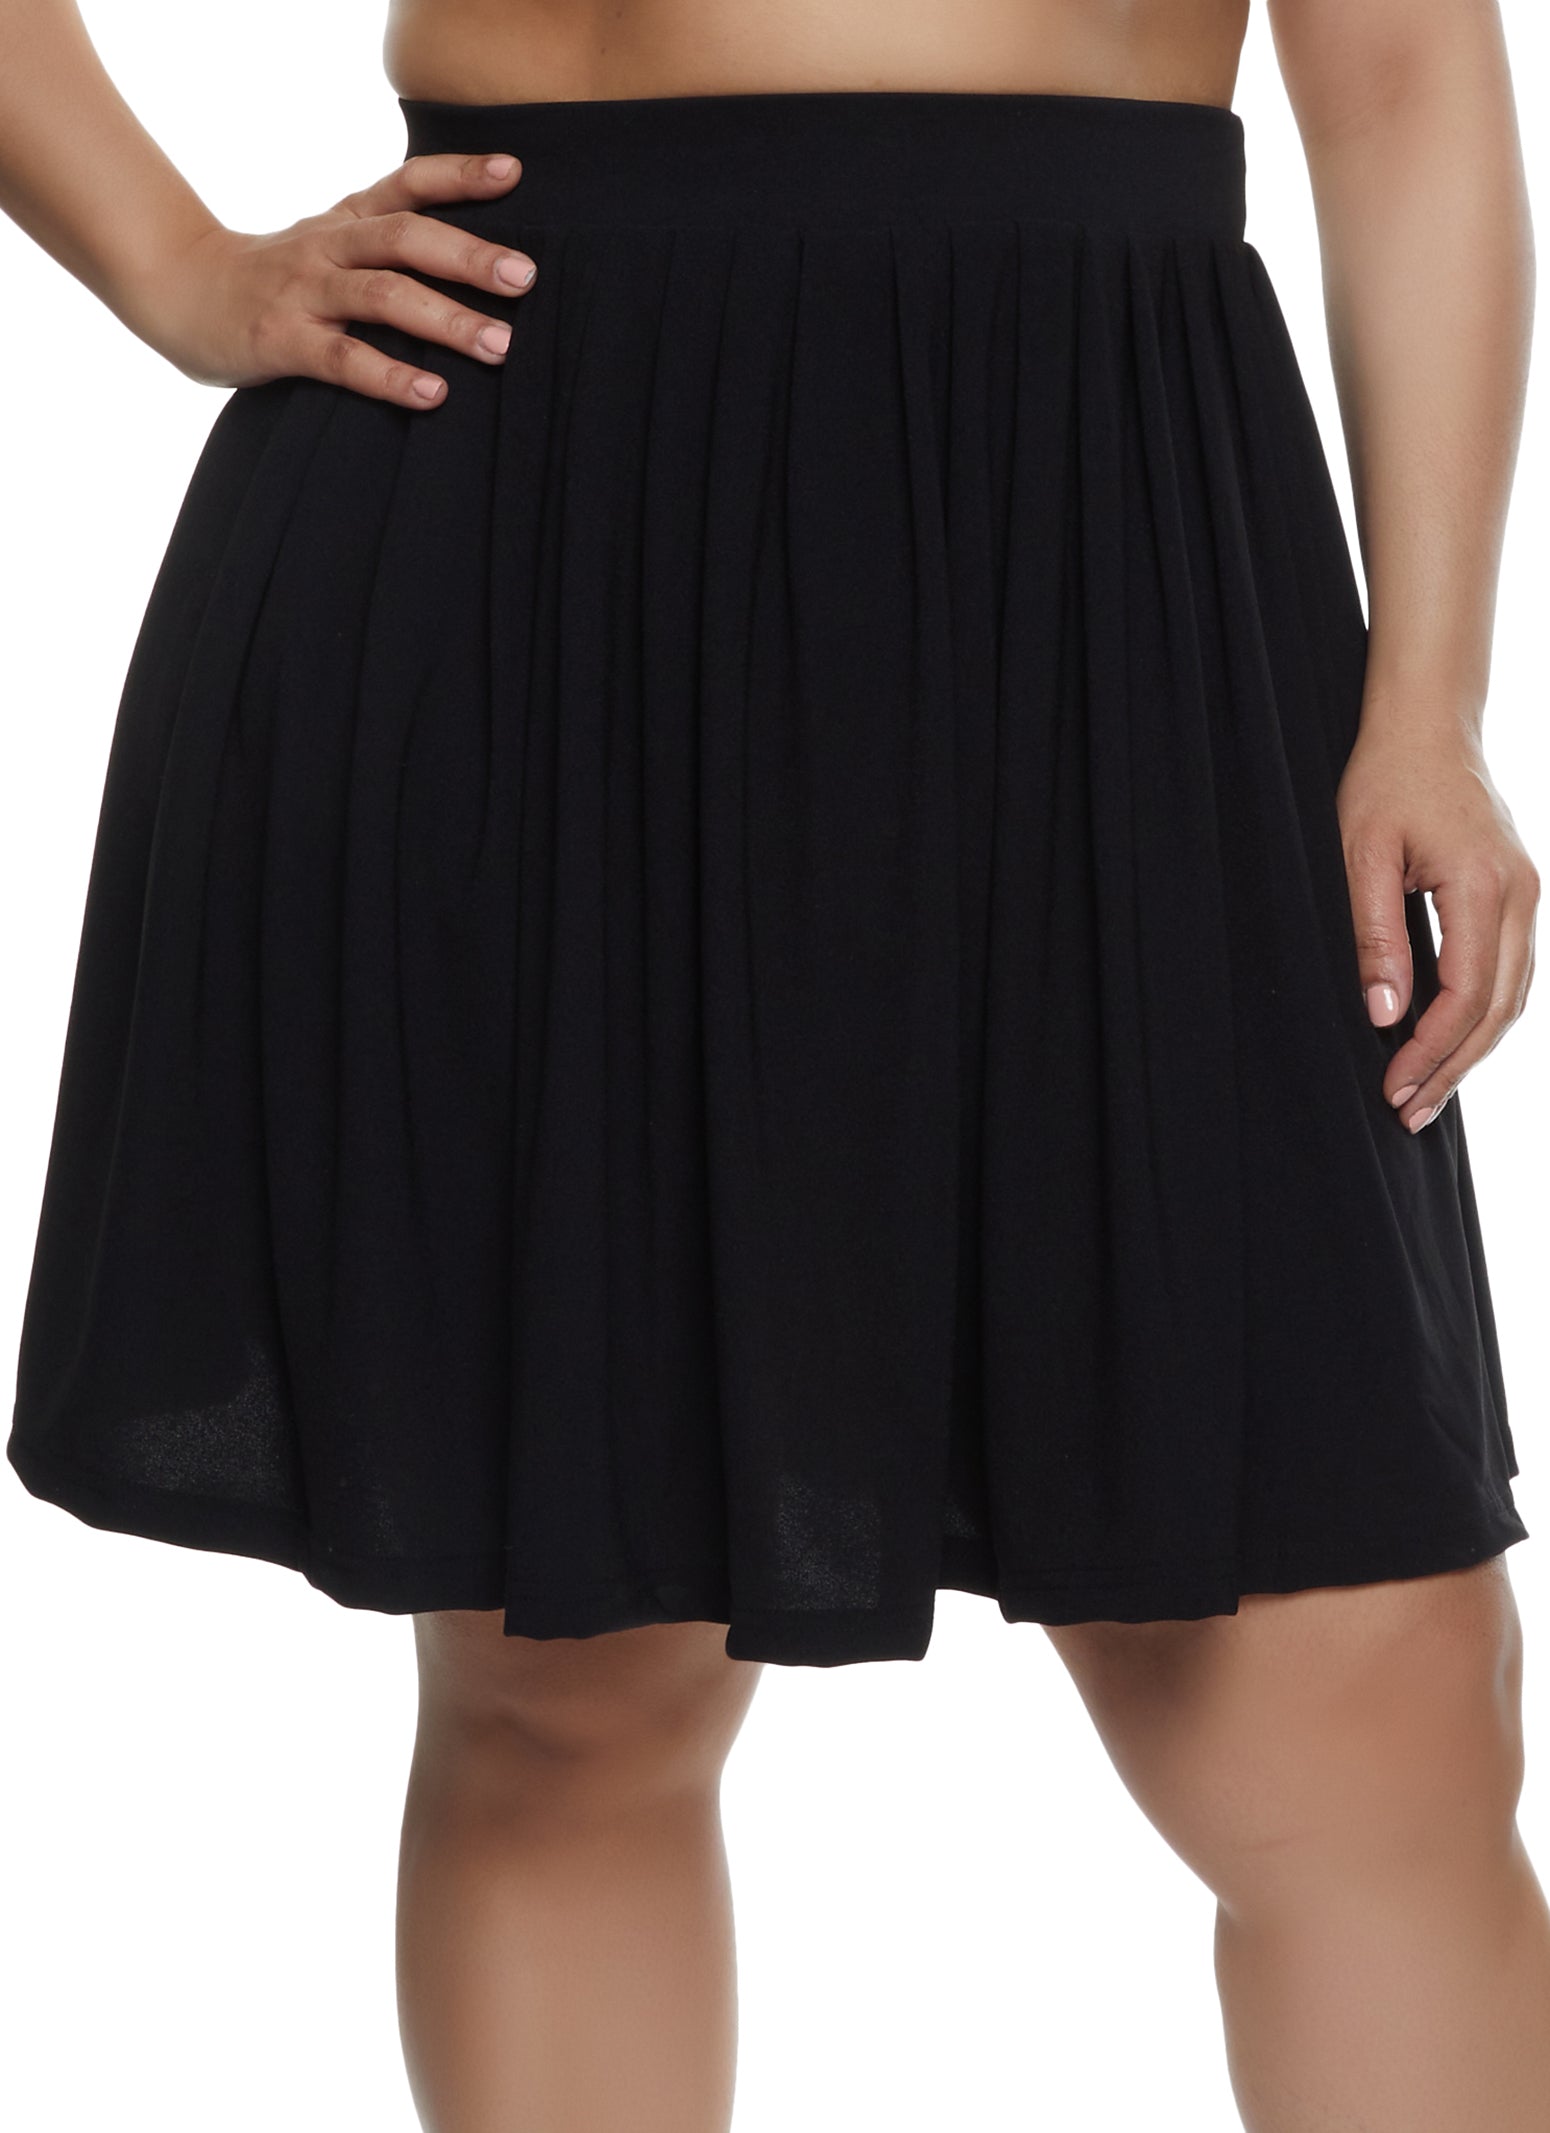 Plus Size Skater Skirts | Everyday Low Prices | Rainbow